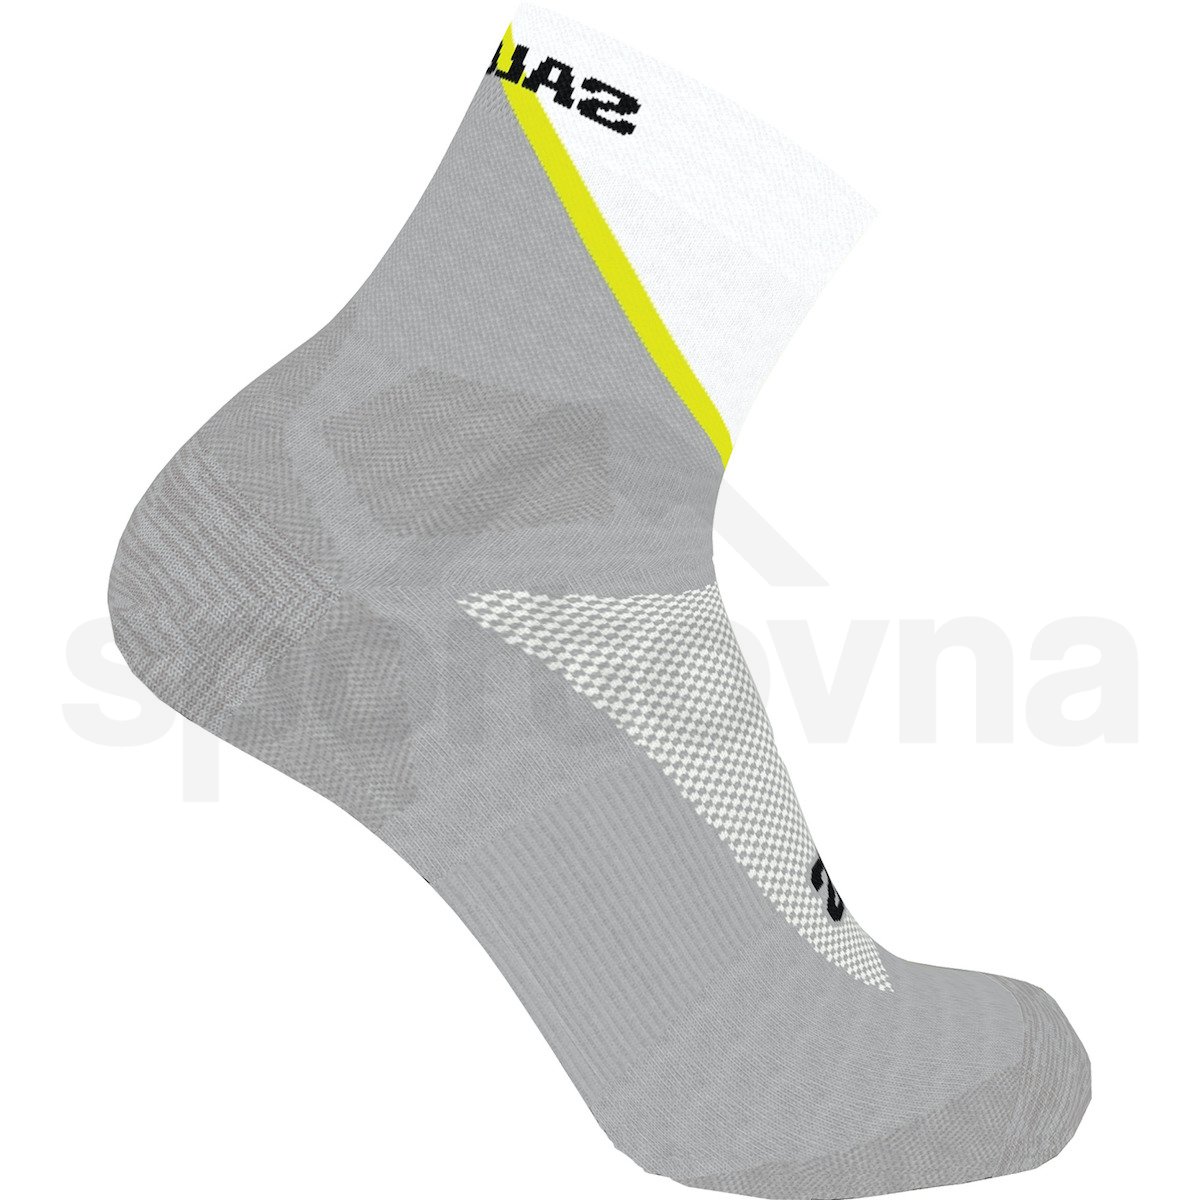 LC2165800_0_VIR_PULSE-ANKLE_WHITE_METAL_SAFETY-YELLOW.png.high-res